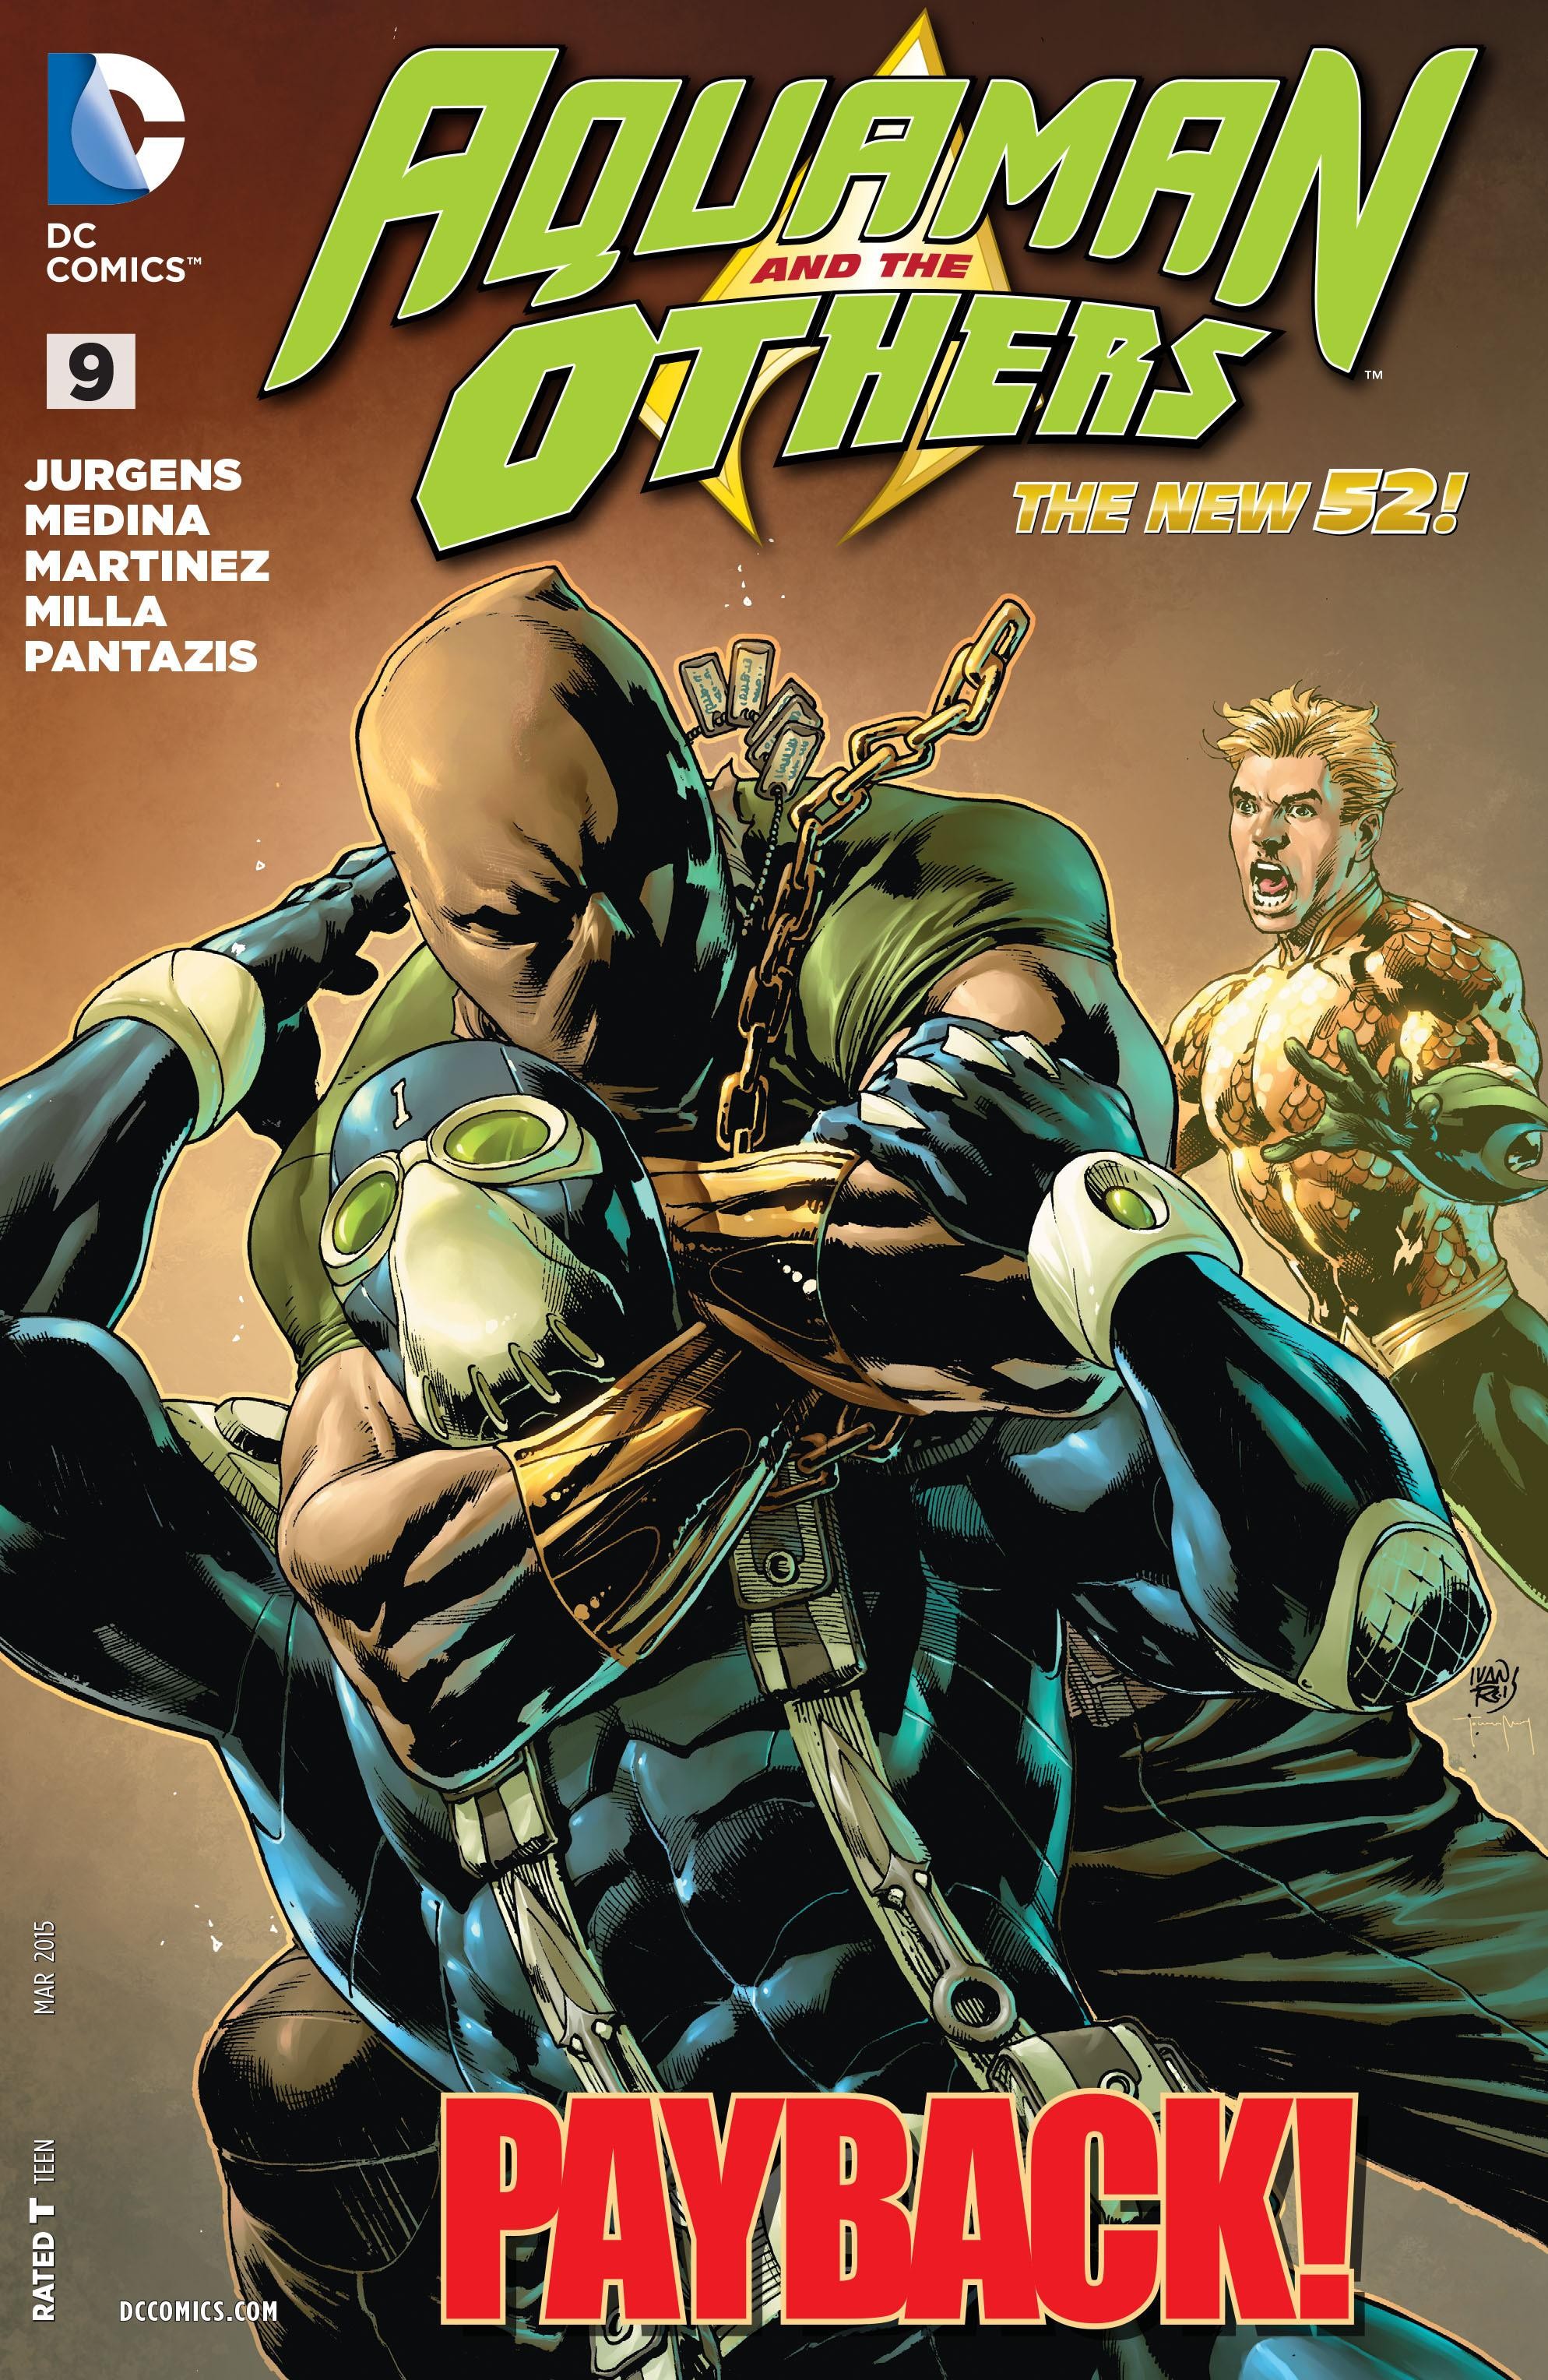 Aquaman and the Others Vol. 1 #9